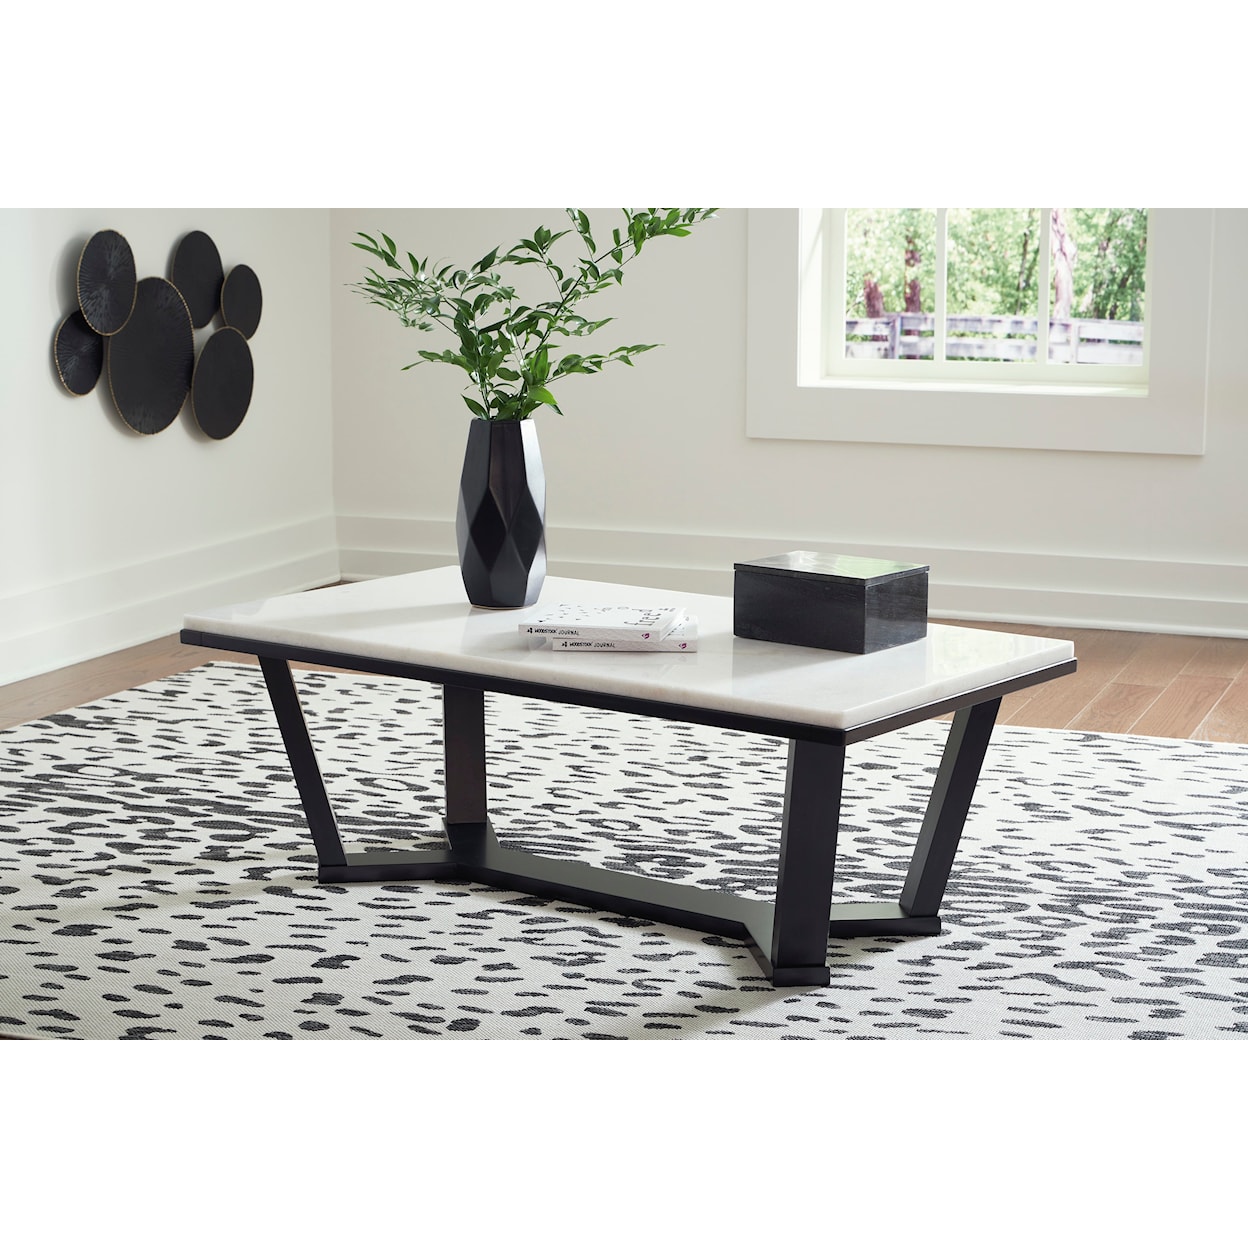 Benchcraft Fostead Coffee Table